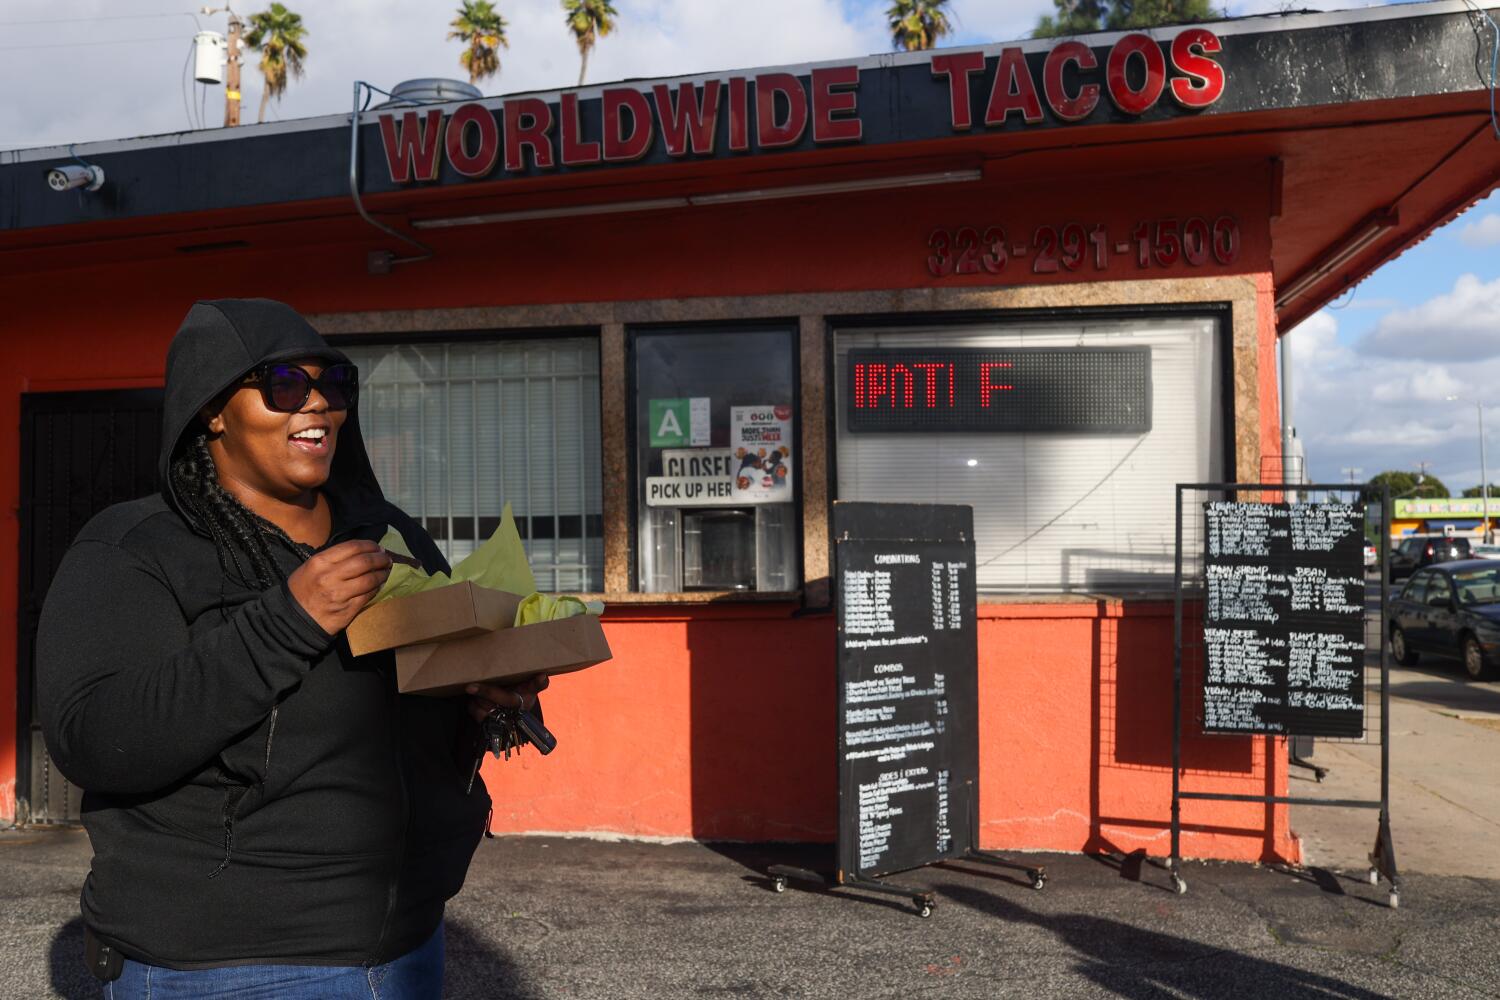 Customers wait hours for tacos from this Leimert Park window. They're worth it